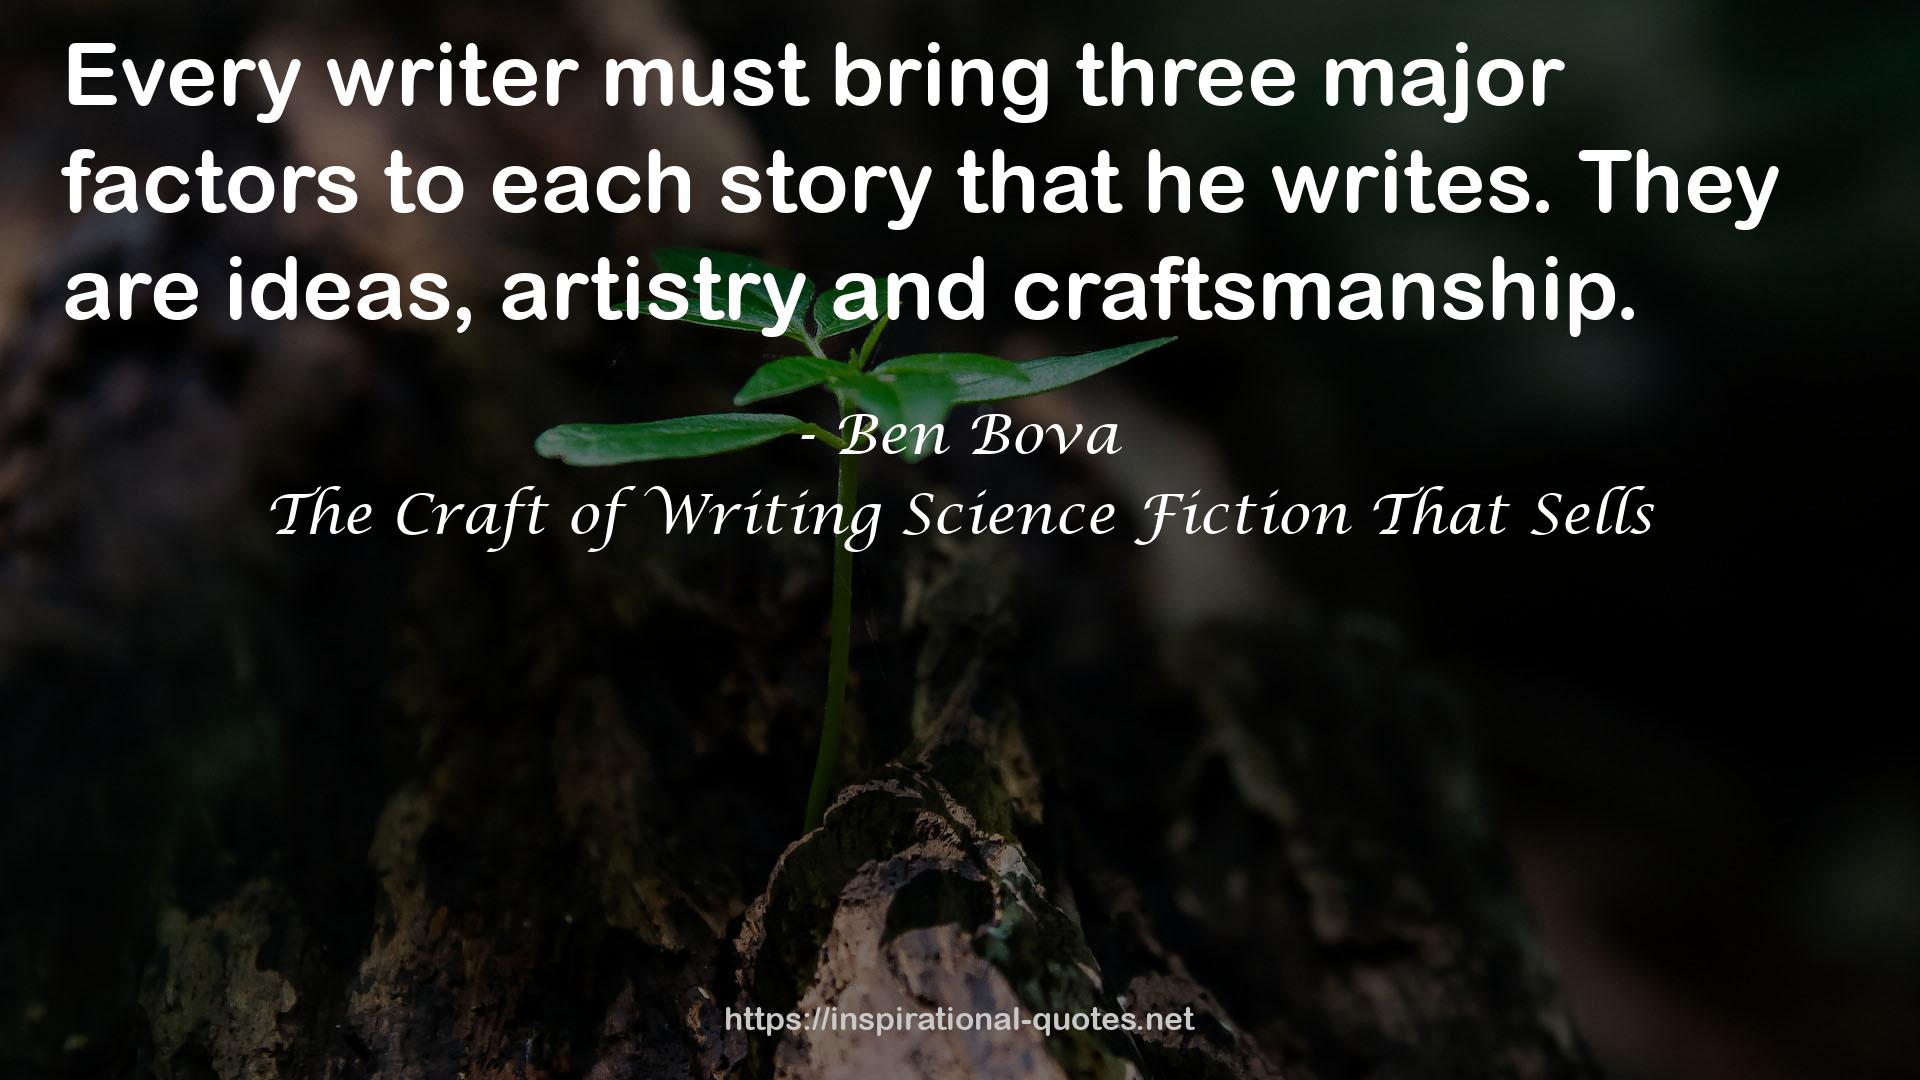 The Craft of Writing Science Fiction That Sells QUOTES